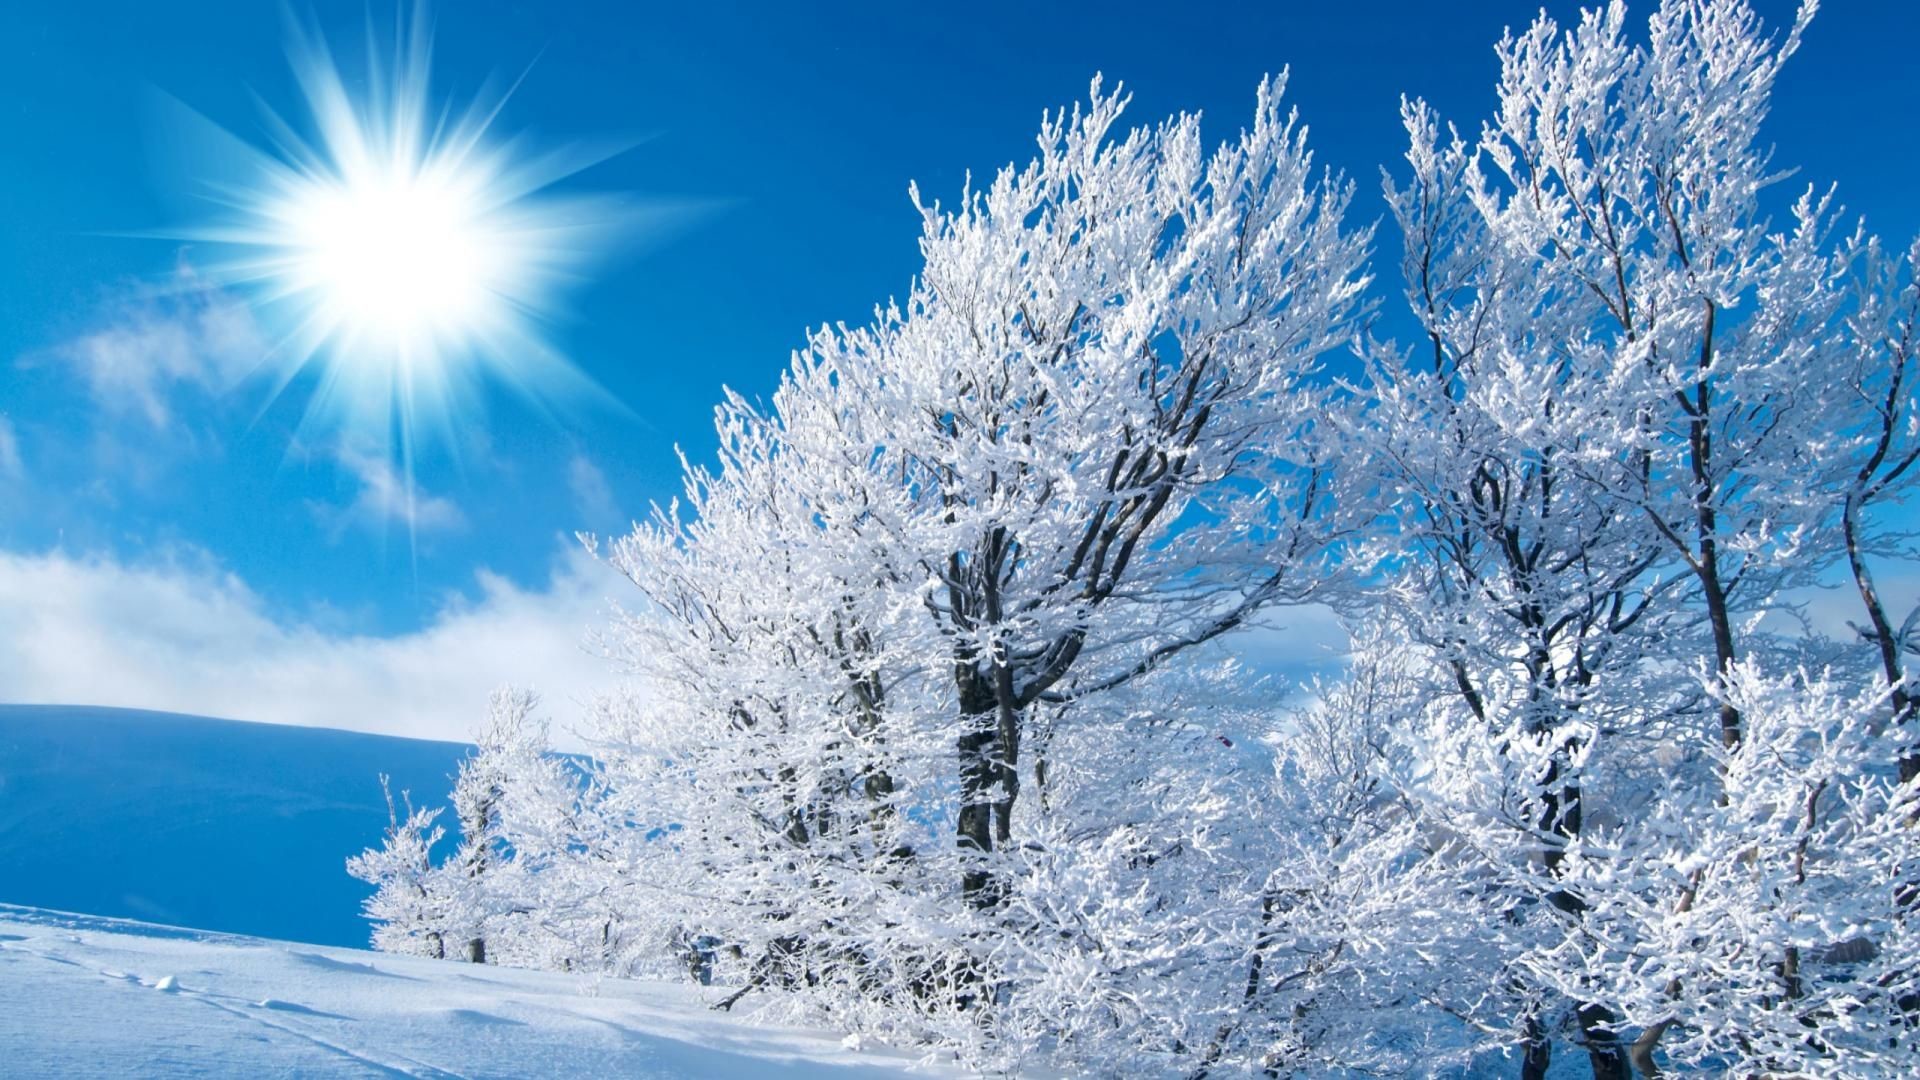 Winter Country Scenes Wallpaper (22+ images)